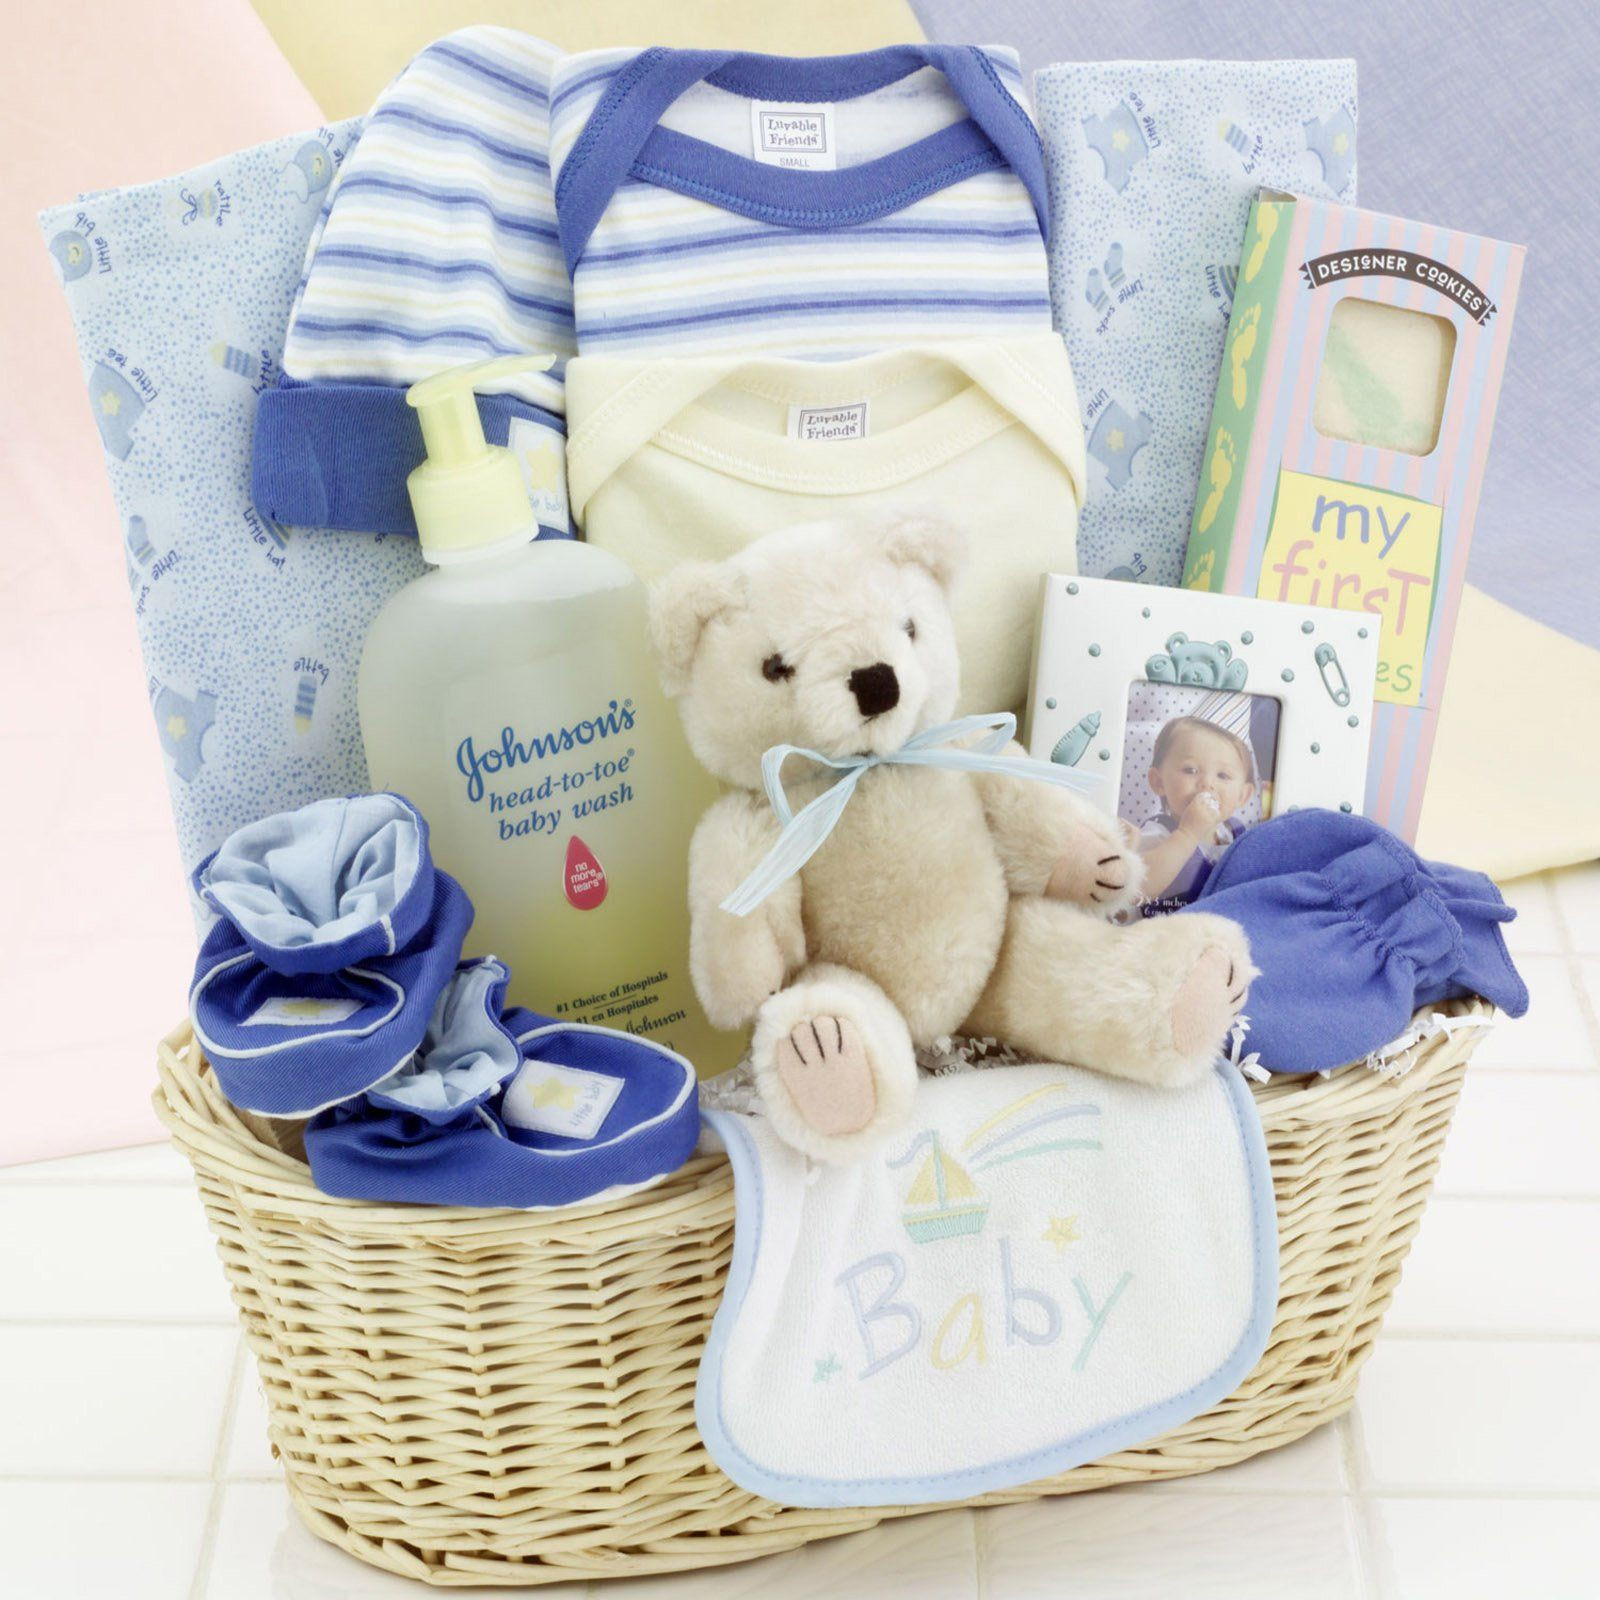 Toddler Gift Ideas For Boys
 Baby Gift Baskets